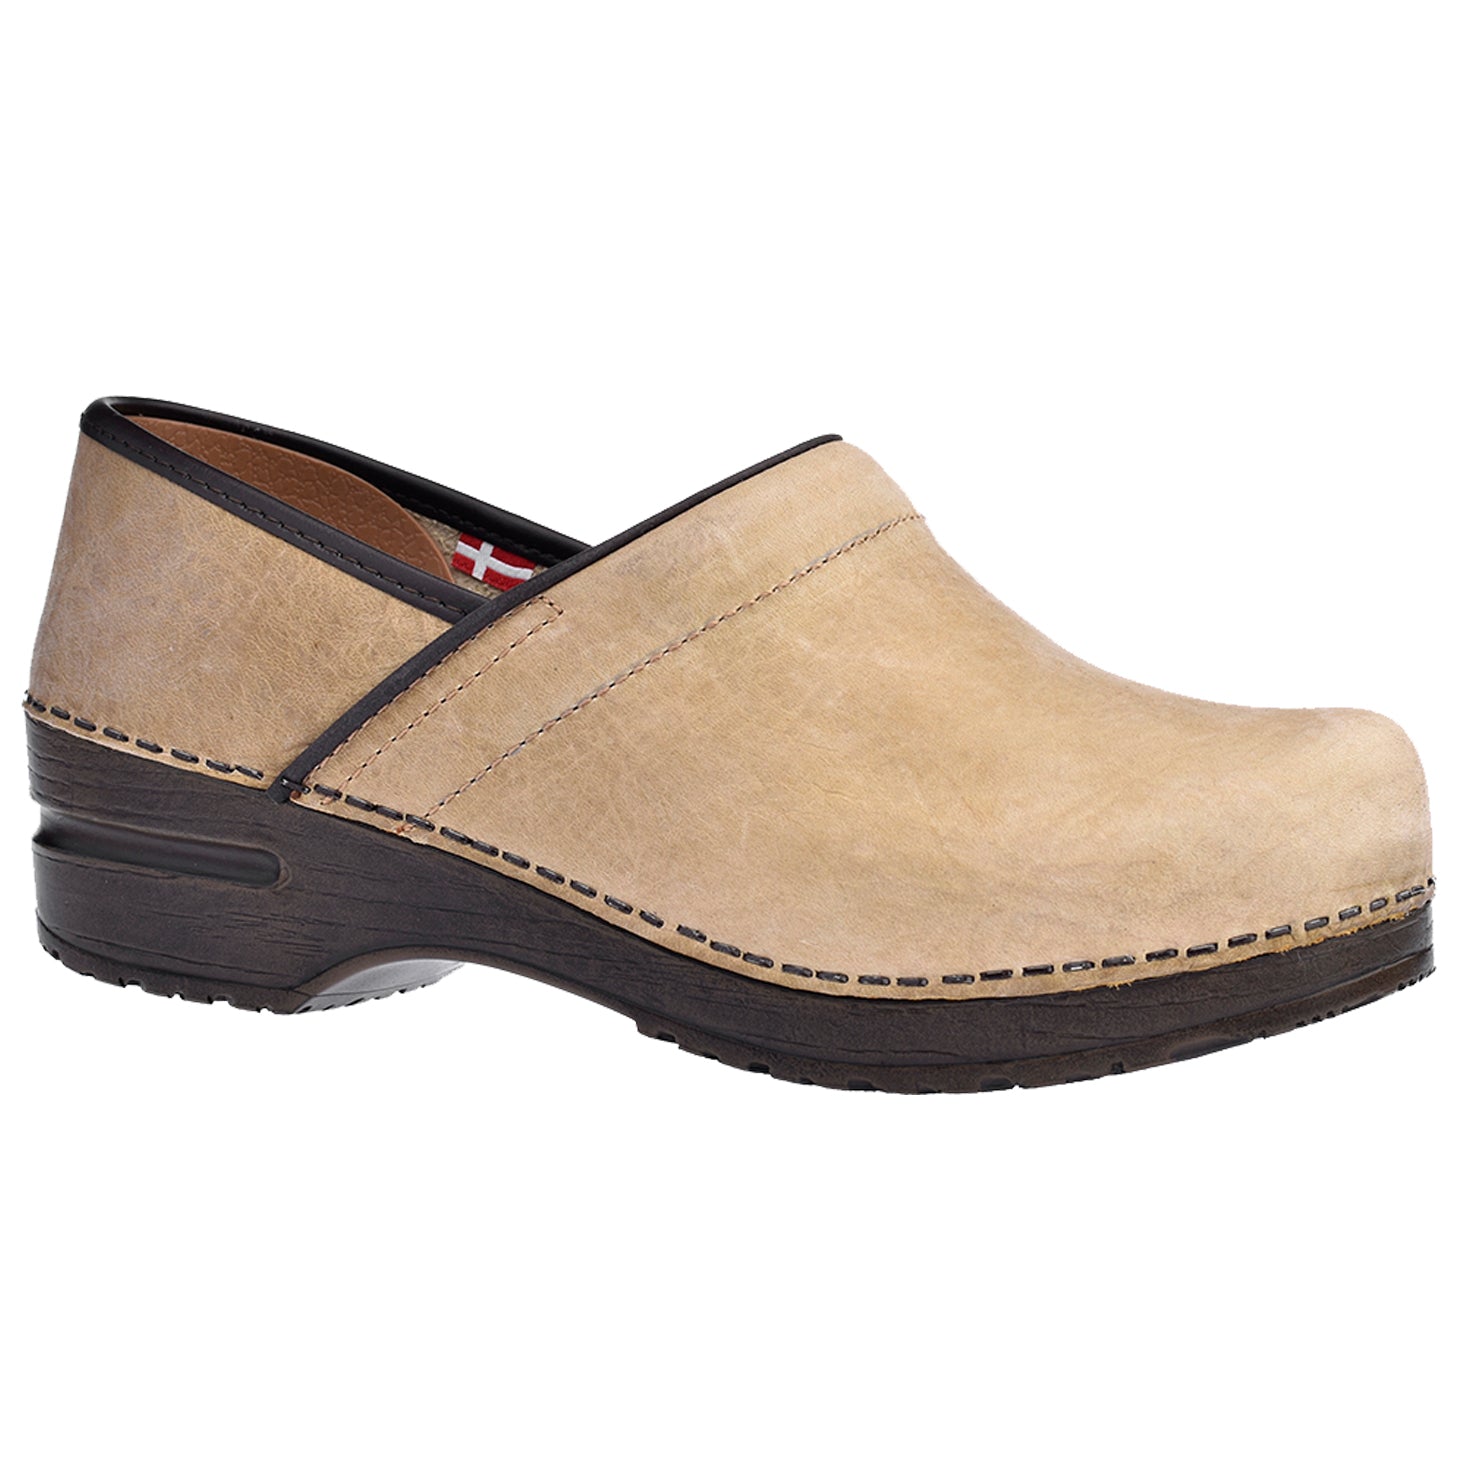 Oril Women's - Natural - Second